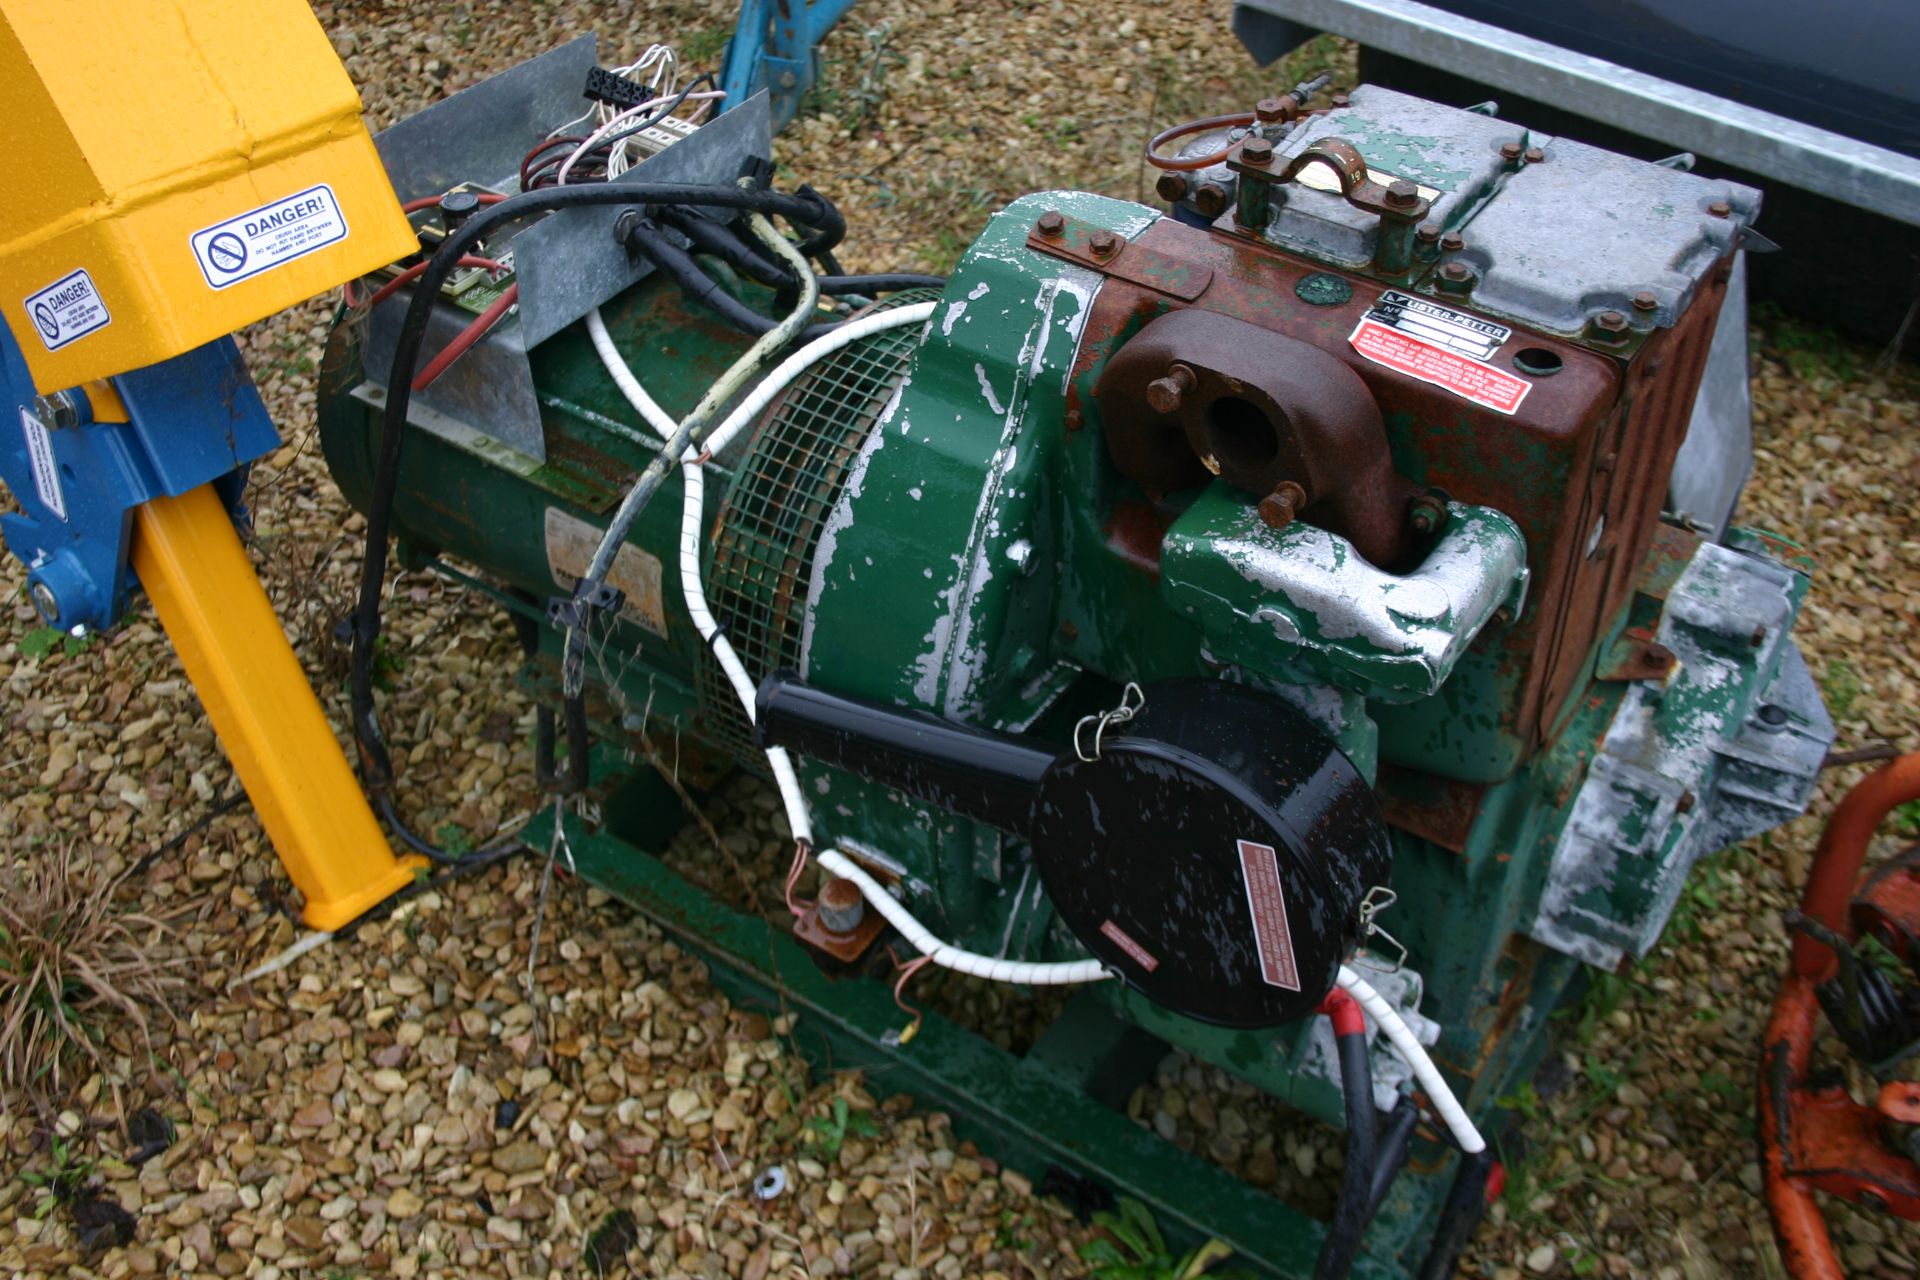 LEROY SOMER LISTER GENERATOR, 9.2 KVA 240 VOLT, FITTED WITH LISTER 2 CYLINDER ENGINE, ELECTRIC START - Image 2 of 6